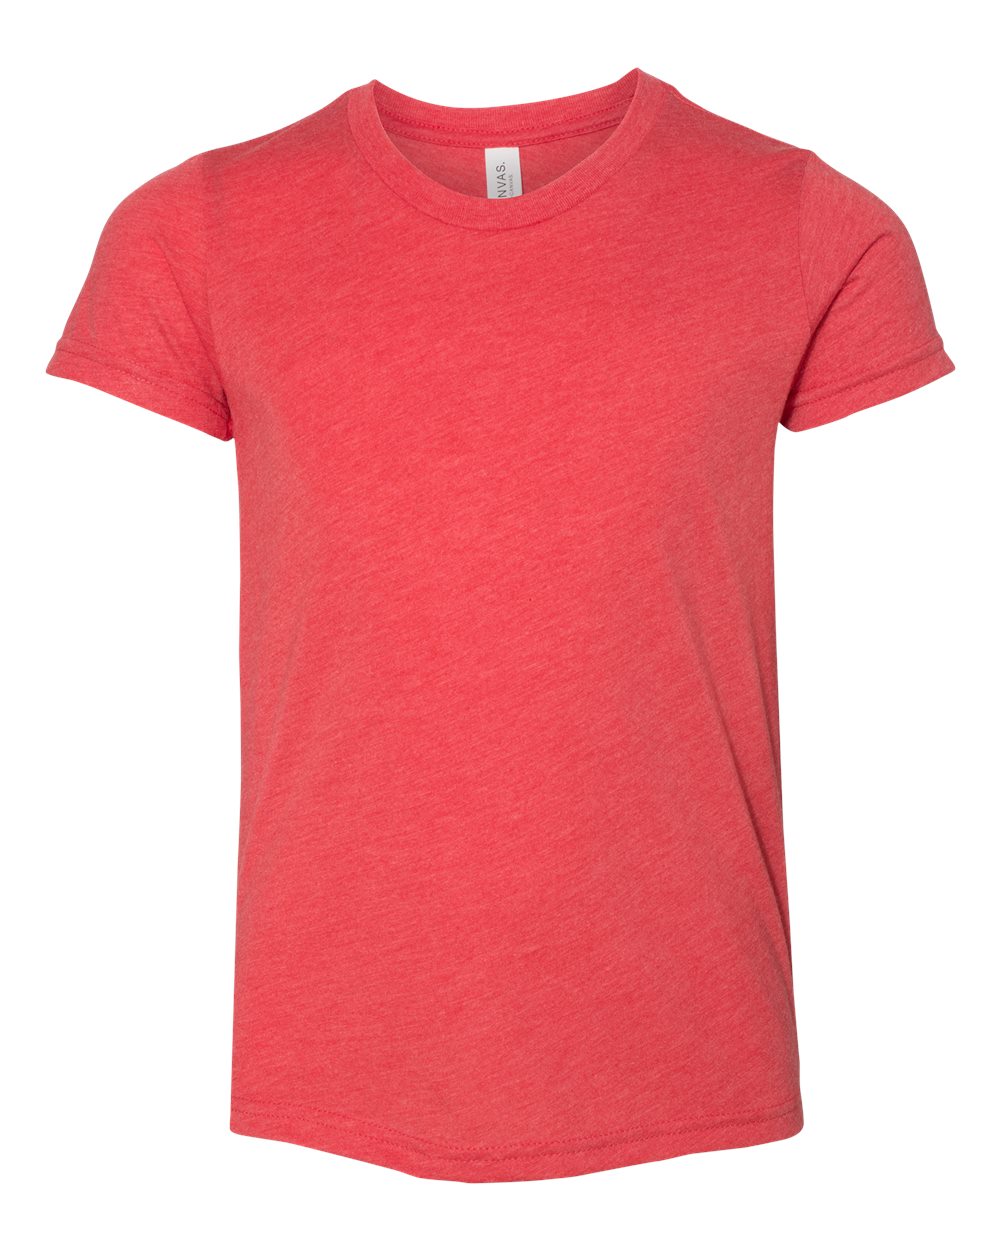 Bella + Canvas Youth Triblend Tee (3413y) in Red Triblend